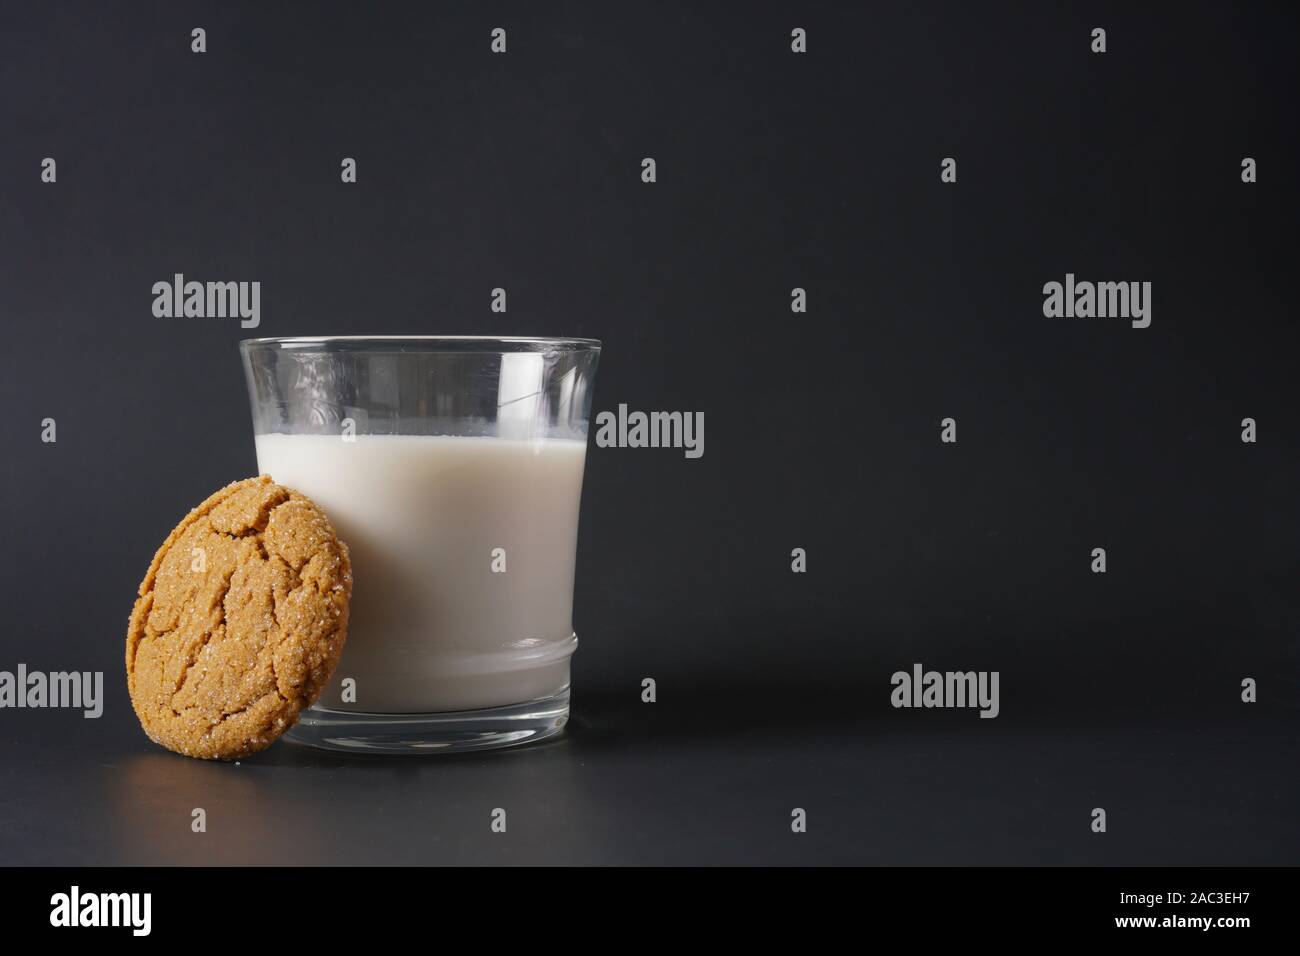 A gingerbread cookie leans up against a glass of cold milk on a black background with copy space on right side Stock Photo